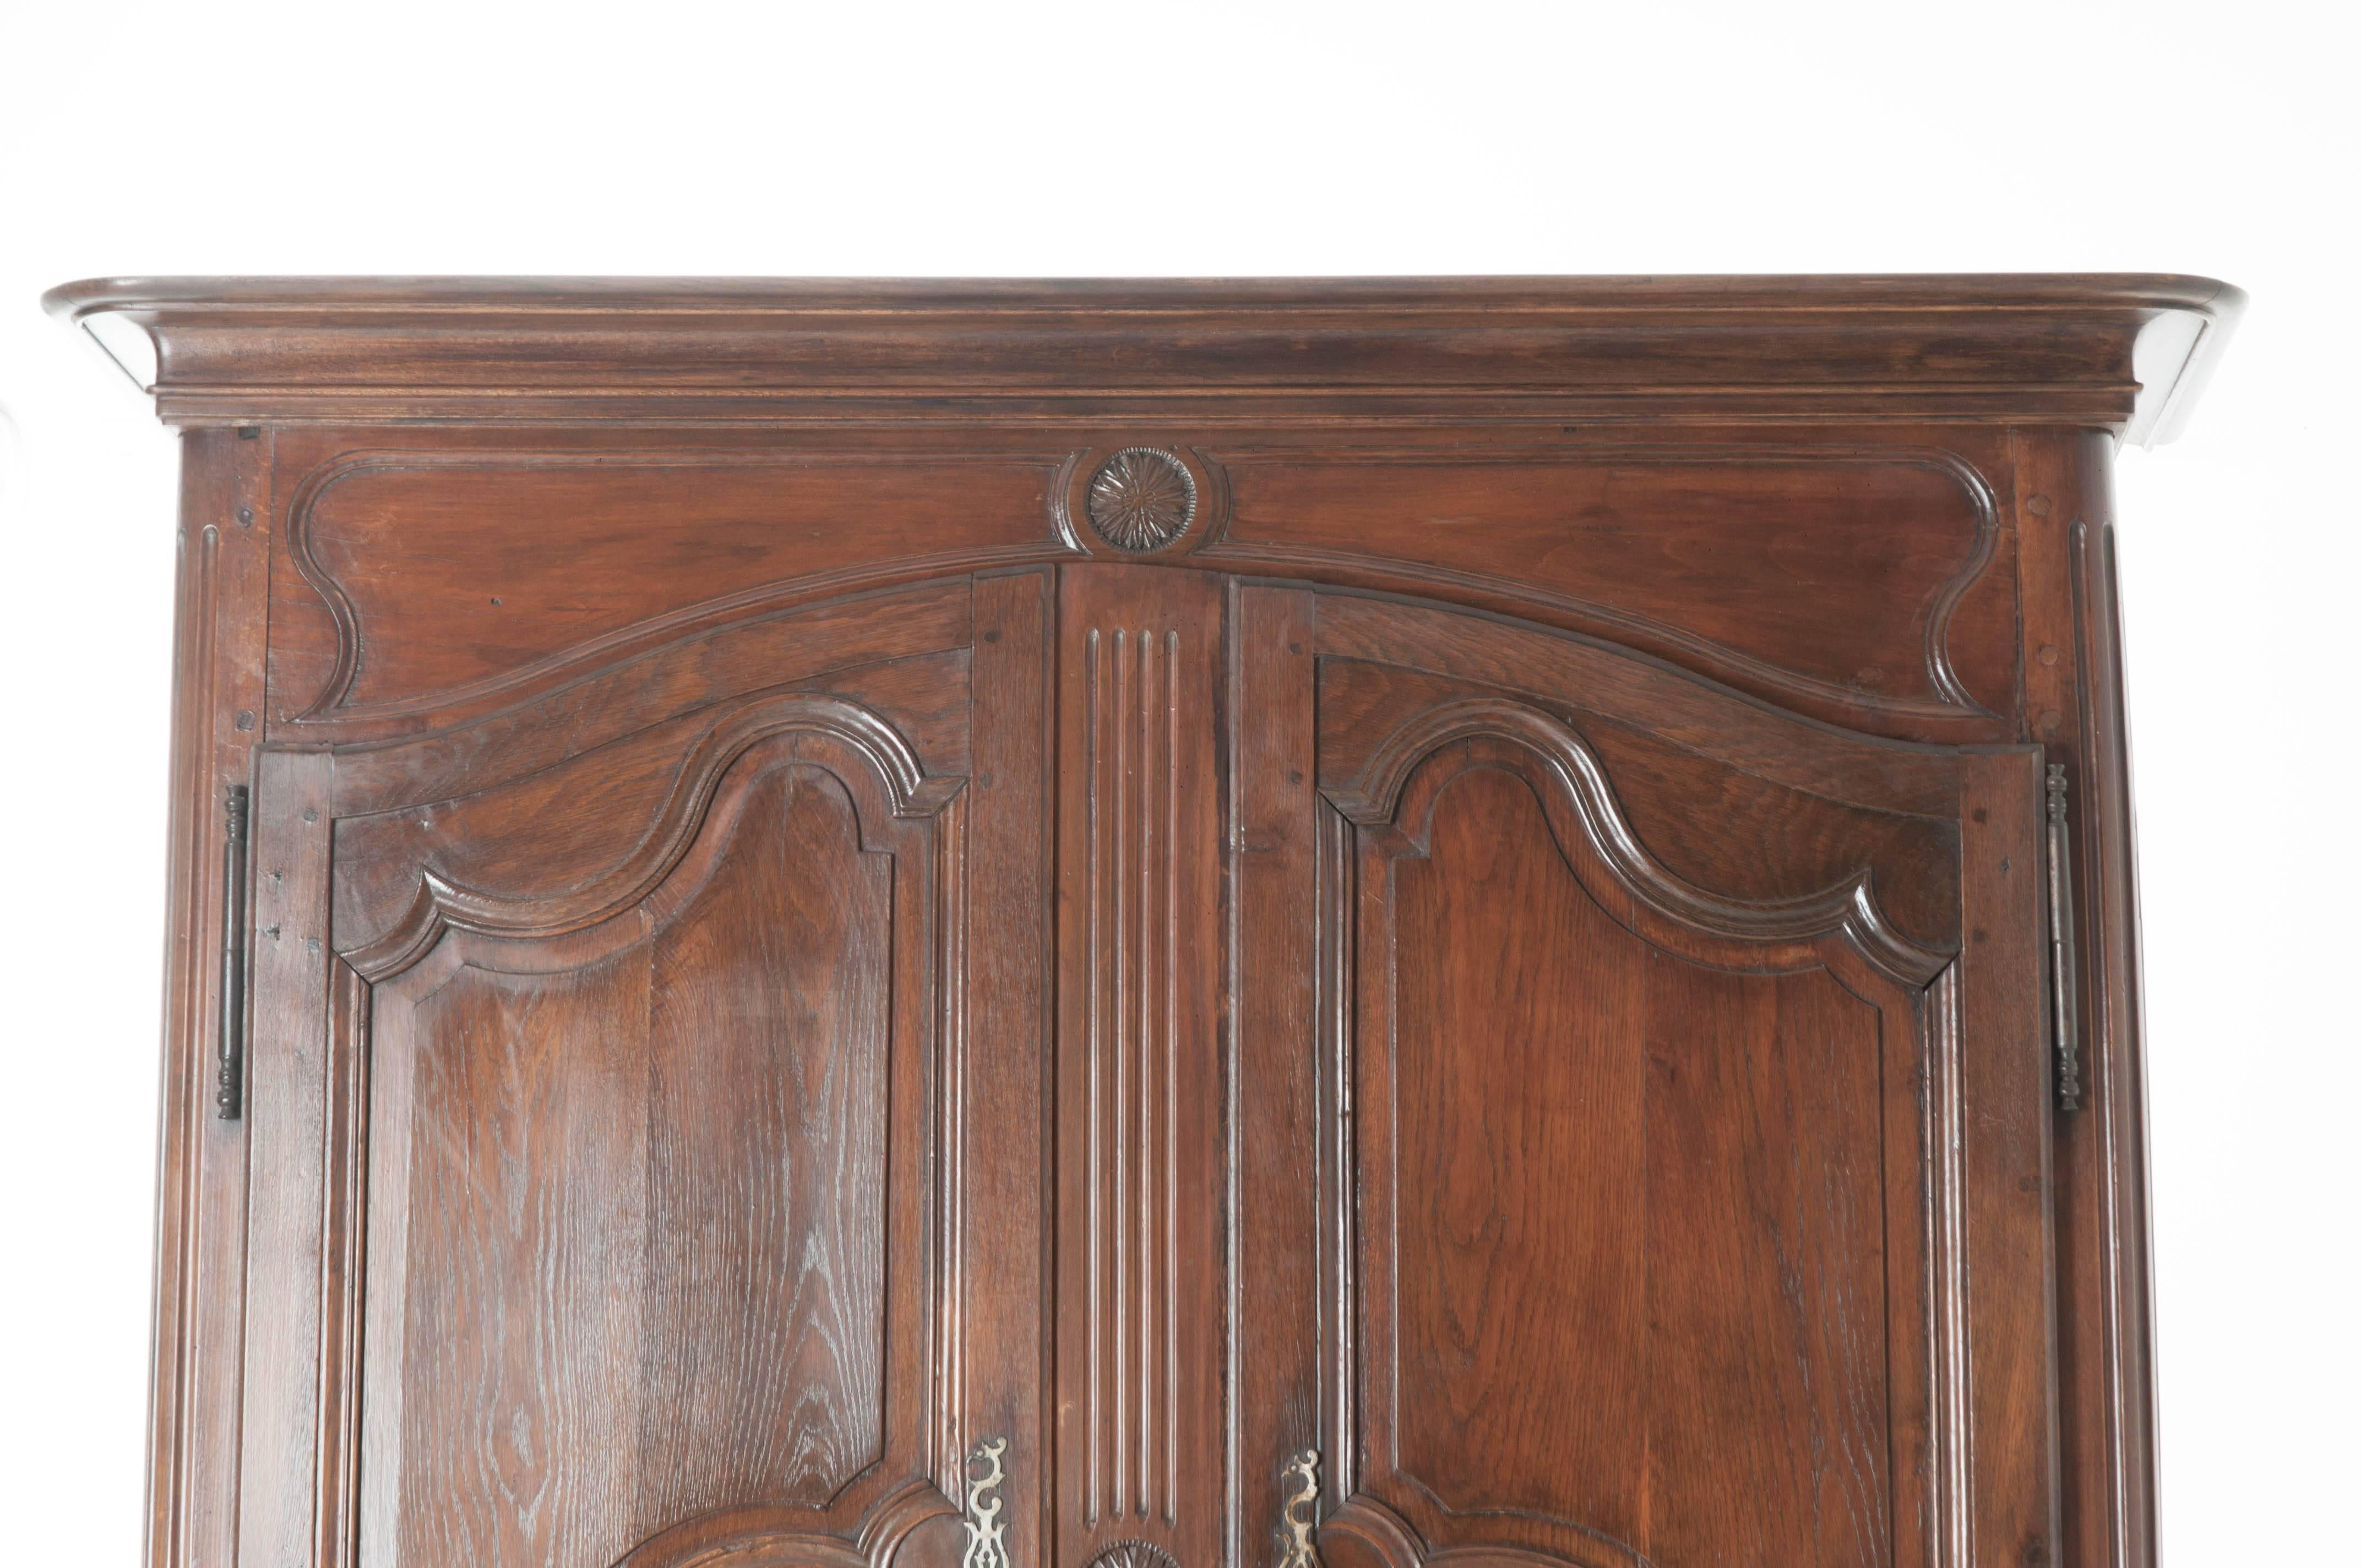 Totally carved by hand, this 18th century oak buffet a deux corps boasts not only wood with an exceptionally well aged patina, but also impeccable craftsmanship. The upper portion features two shaped doors with carved shaped panels, circular flower